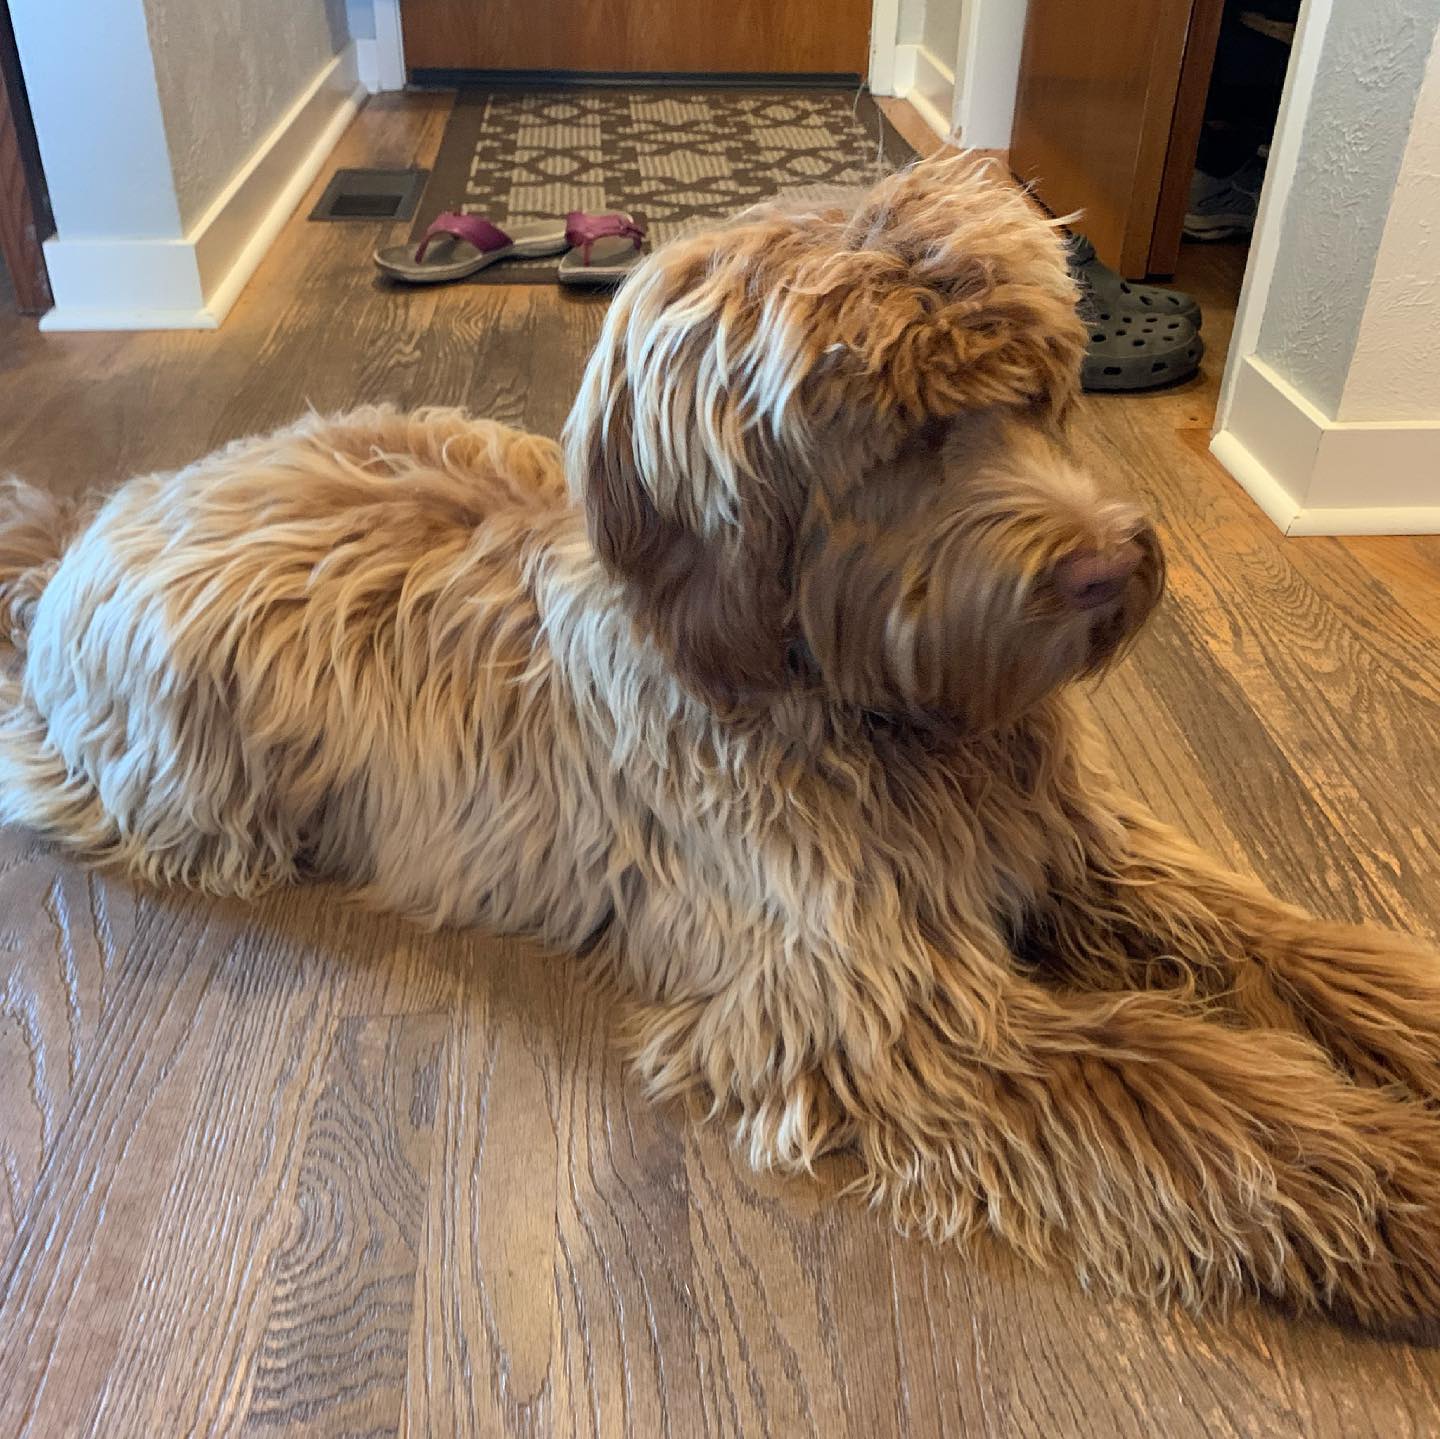 Yesterday was the day we got our new dog! Actually, @rusty.the.dog.yyj went in for his first body trim and due to some bad mats we had to go shorter than desired. Such a drastic change, but still sweet loveable Rusty. #labradoodle #australianlabradoodle #sunvalleylabradoodles #puppy #yyj #dogsofinstagram #dogsofig #rustydoodle